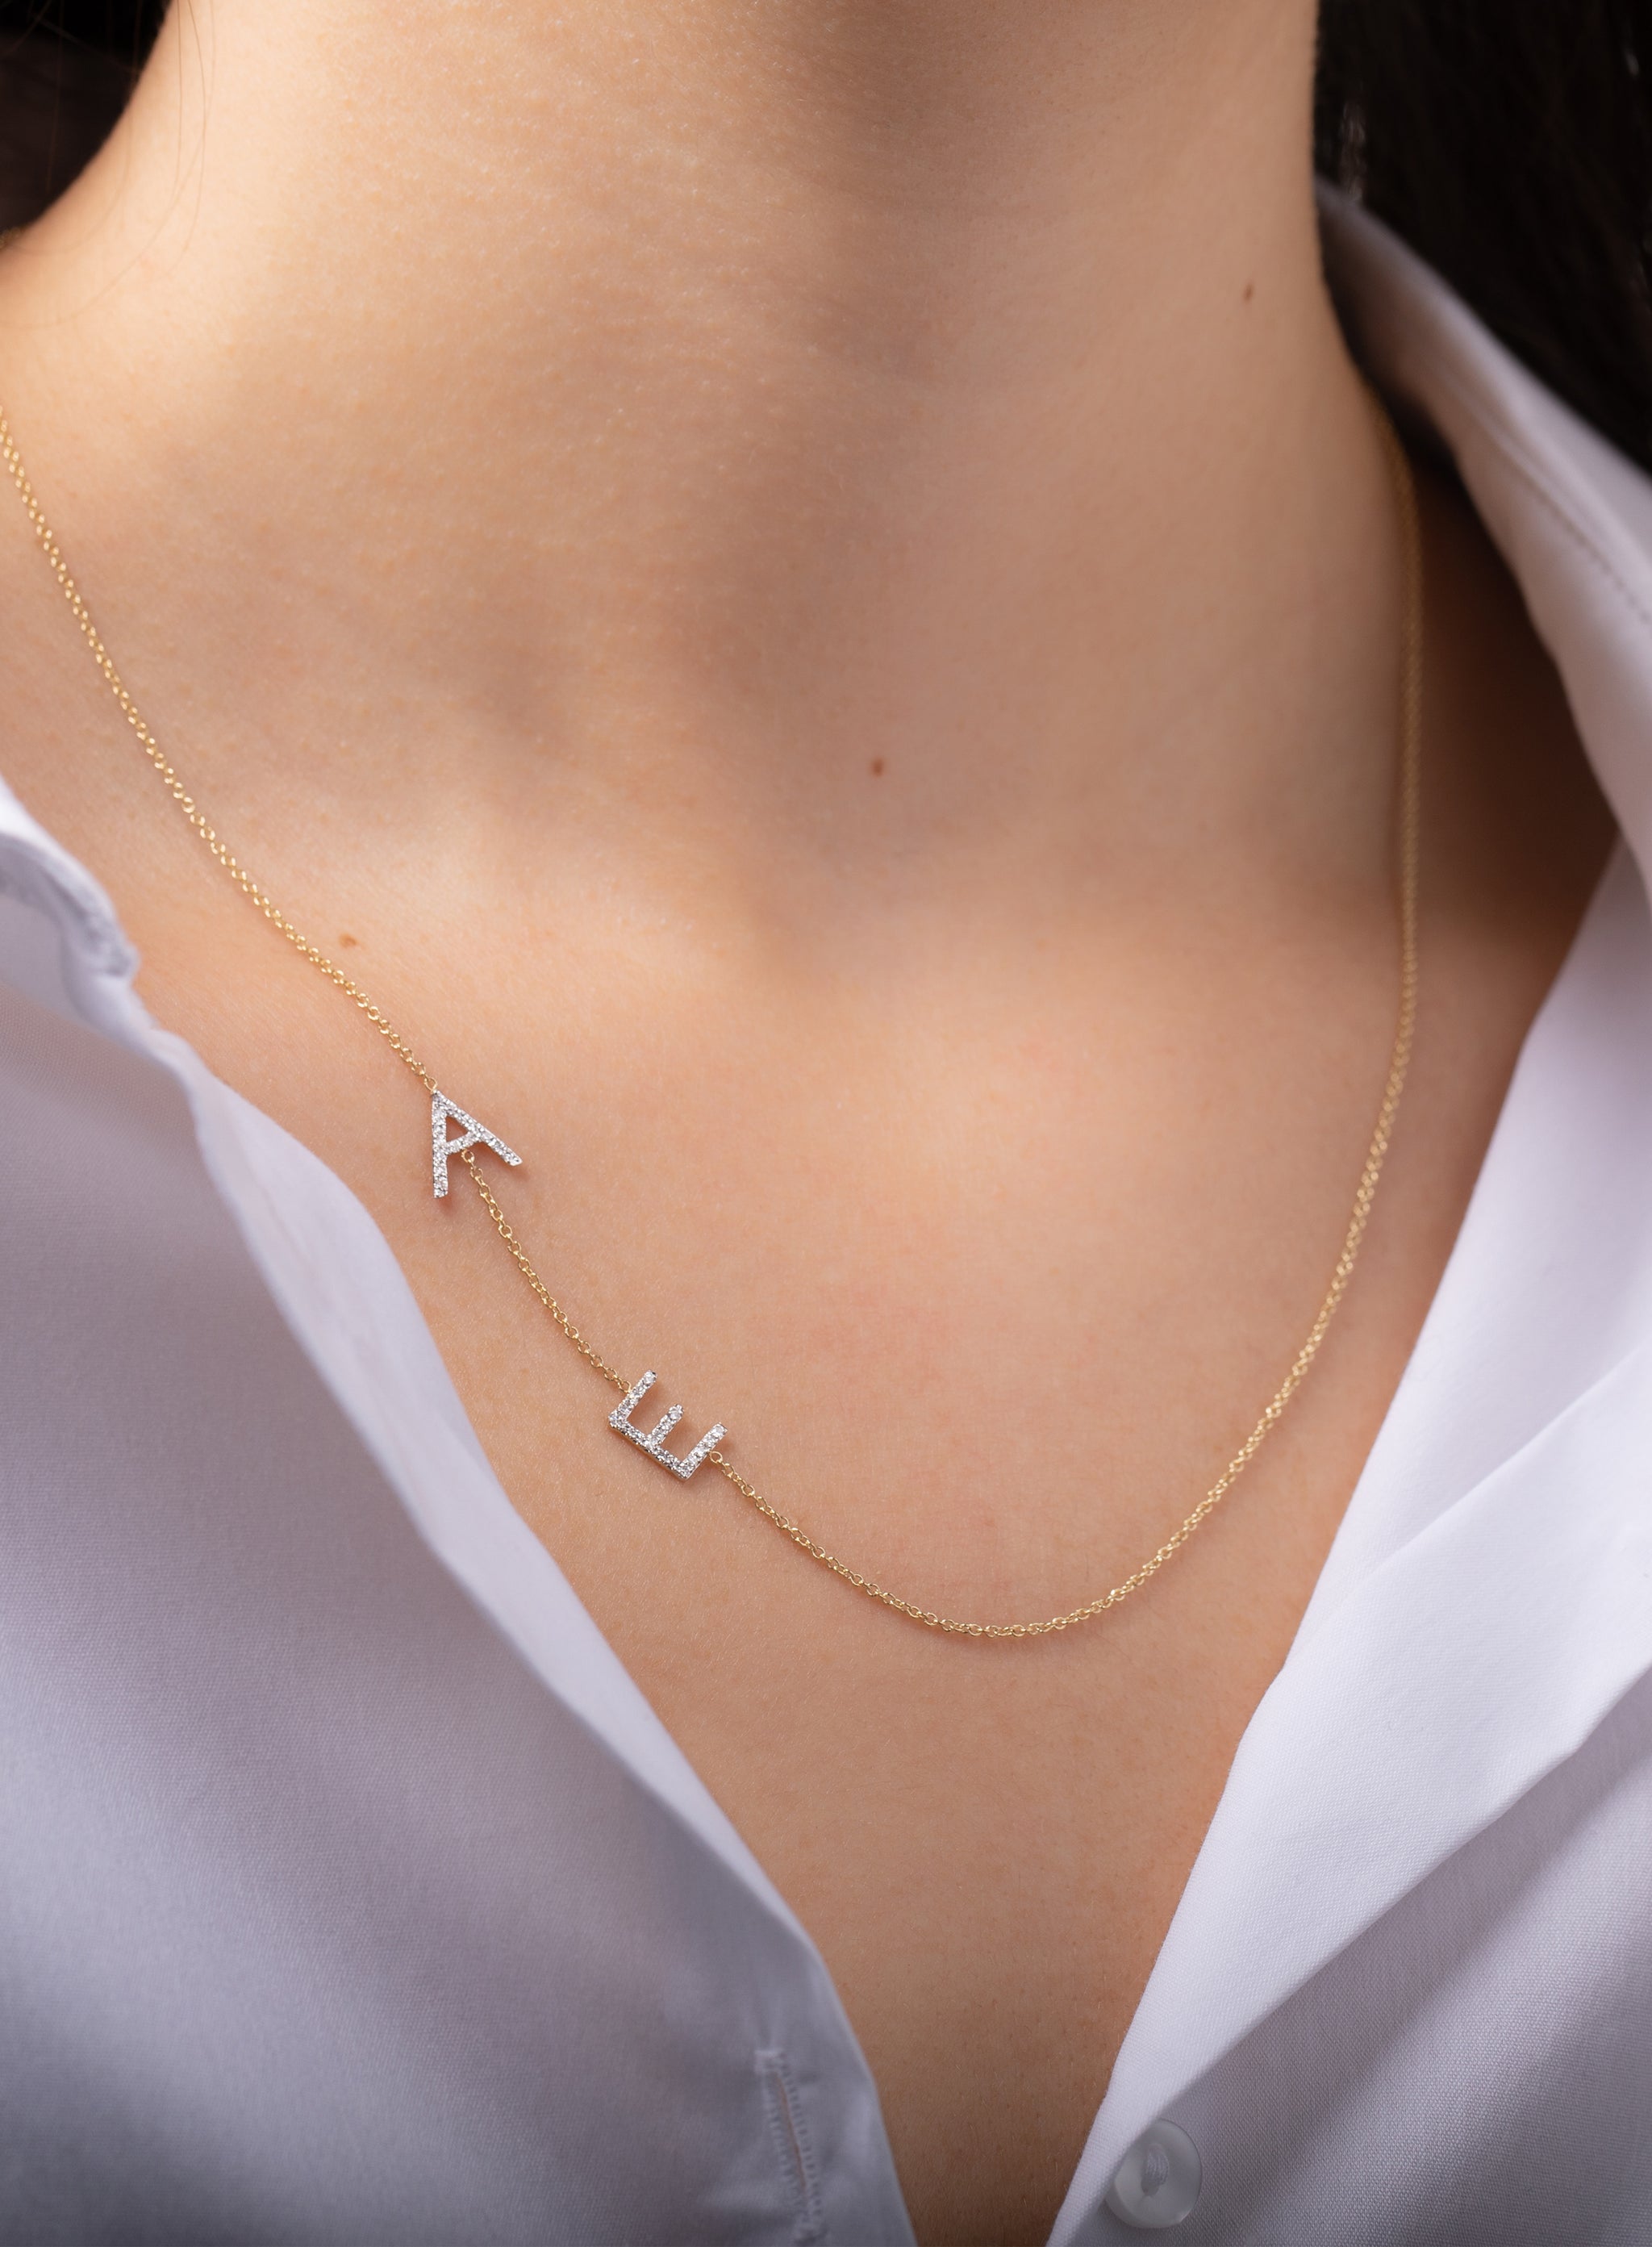 14K Solid Gold Sideways Initial Necklace - Up to 4 Letters – Be Monogrammed